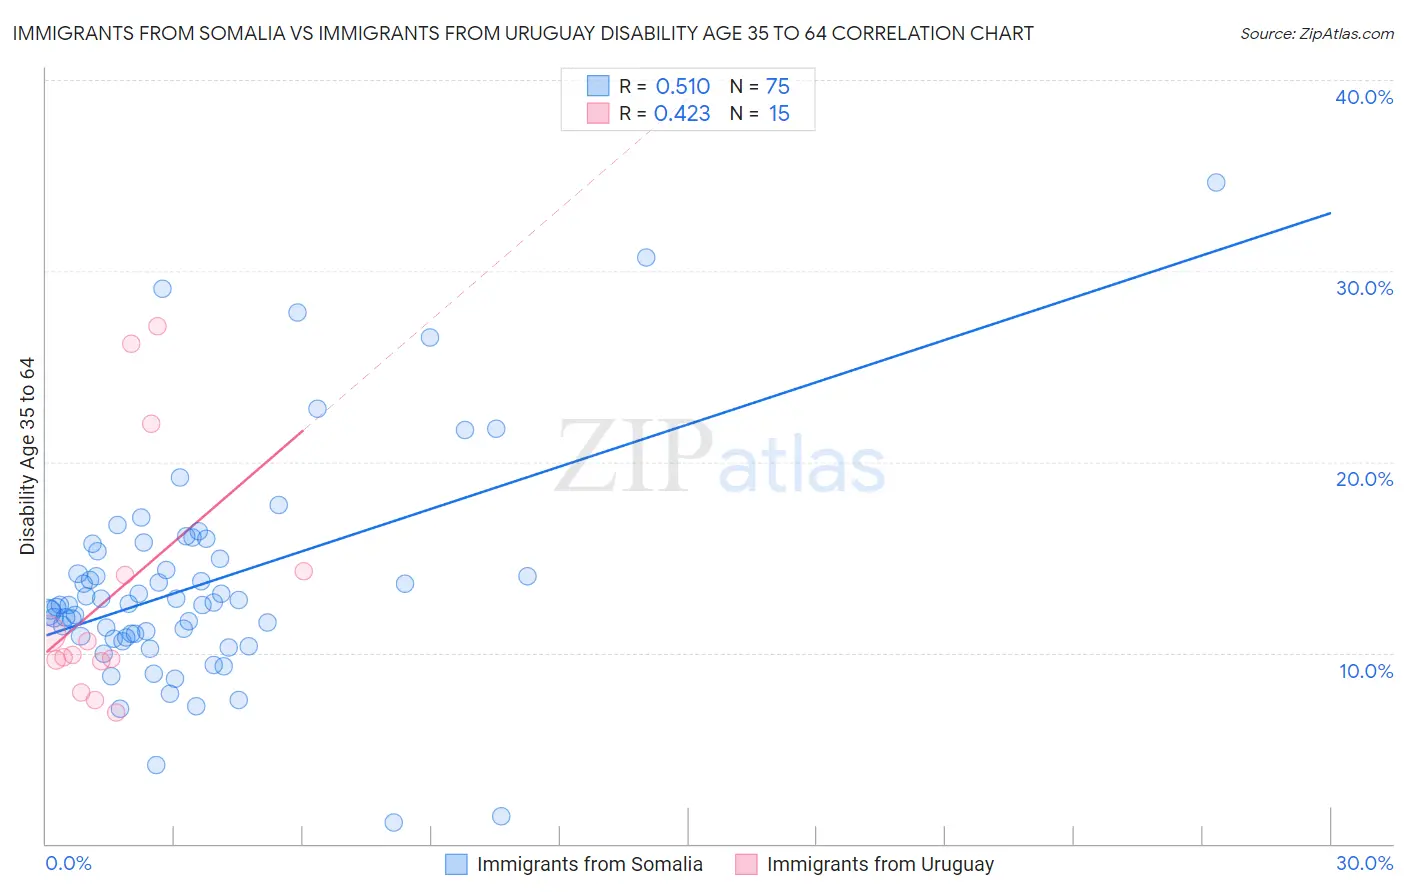 Immigrants from Somalia vs Immigrants from Uruguay Disability Age 35 to 64